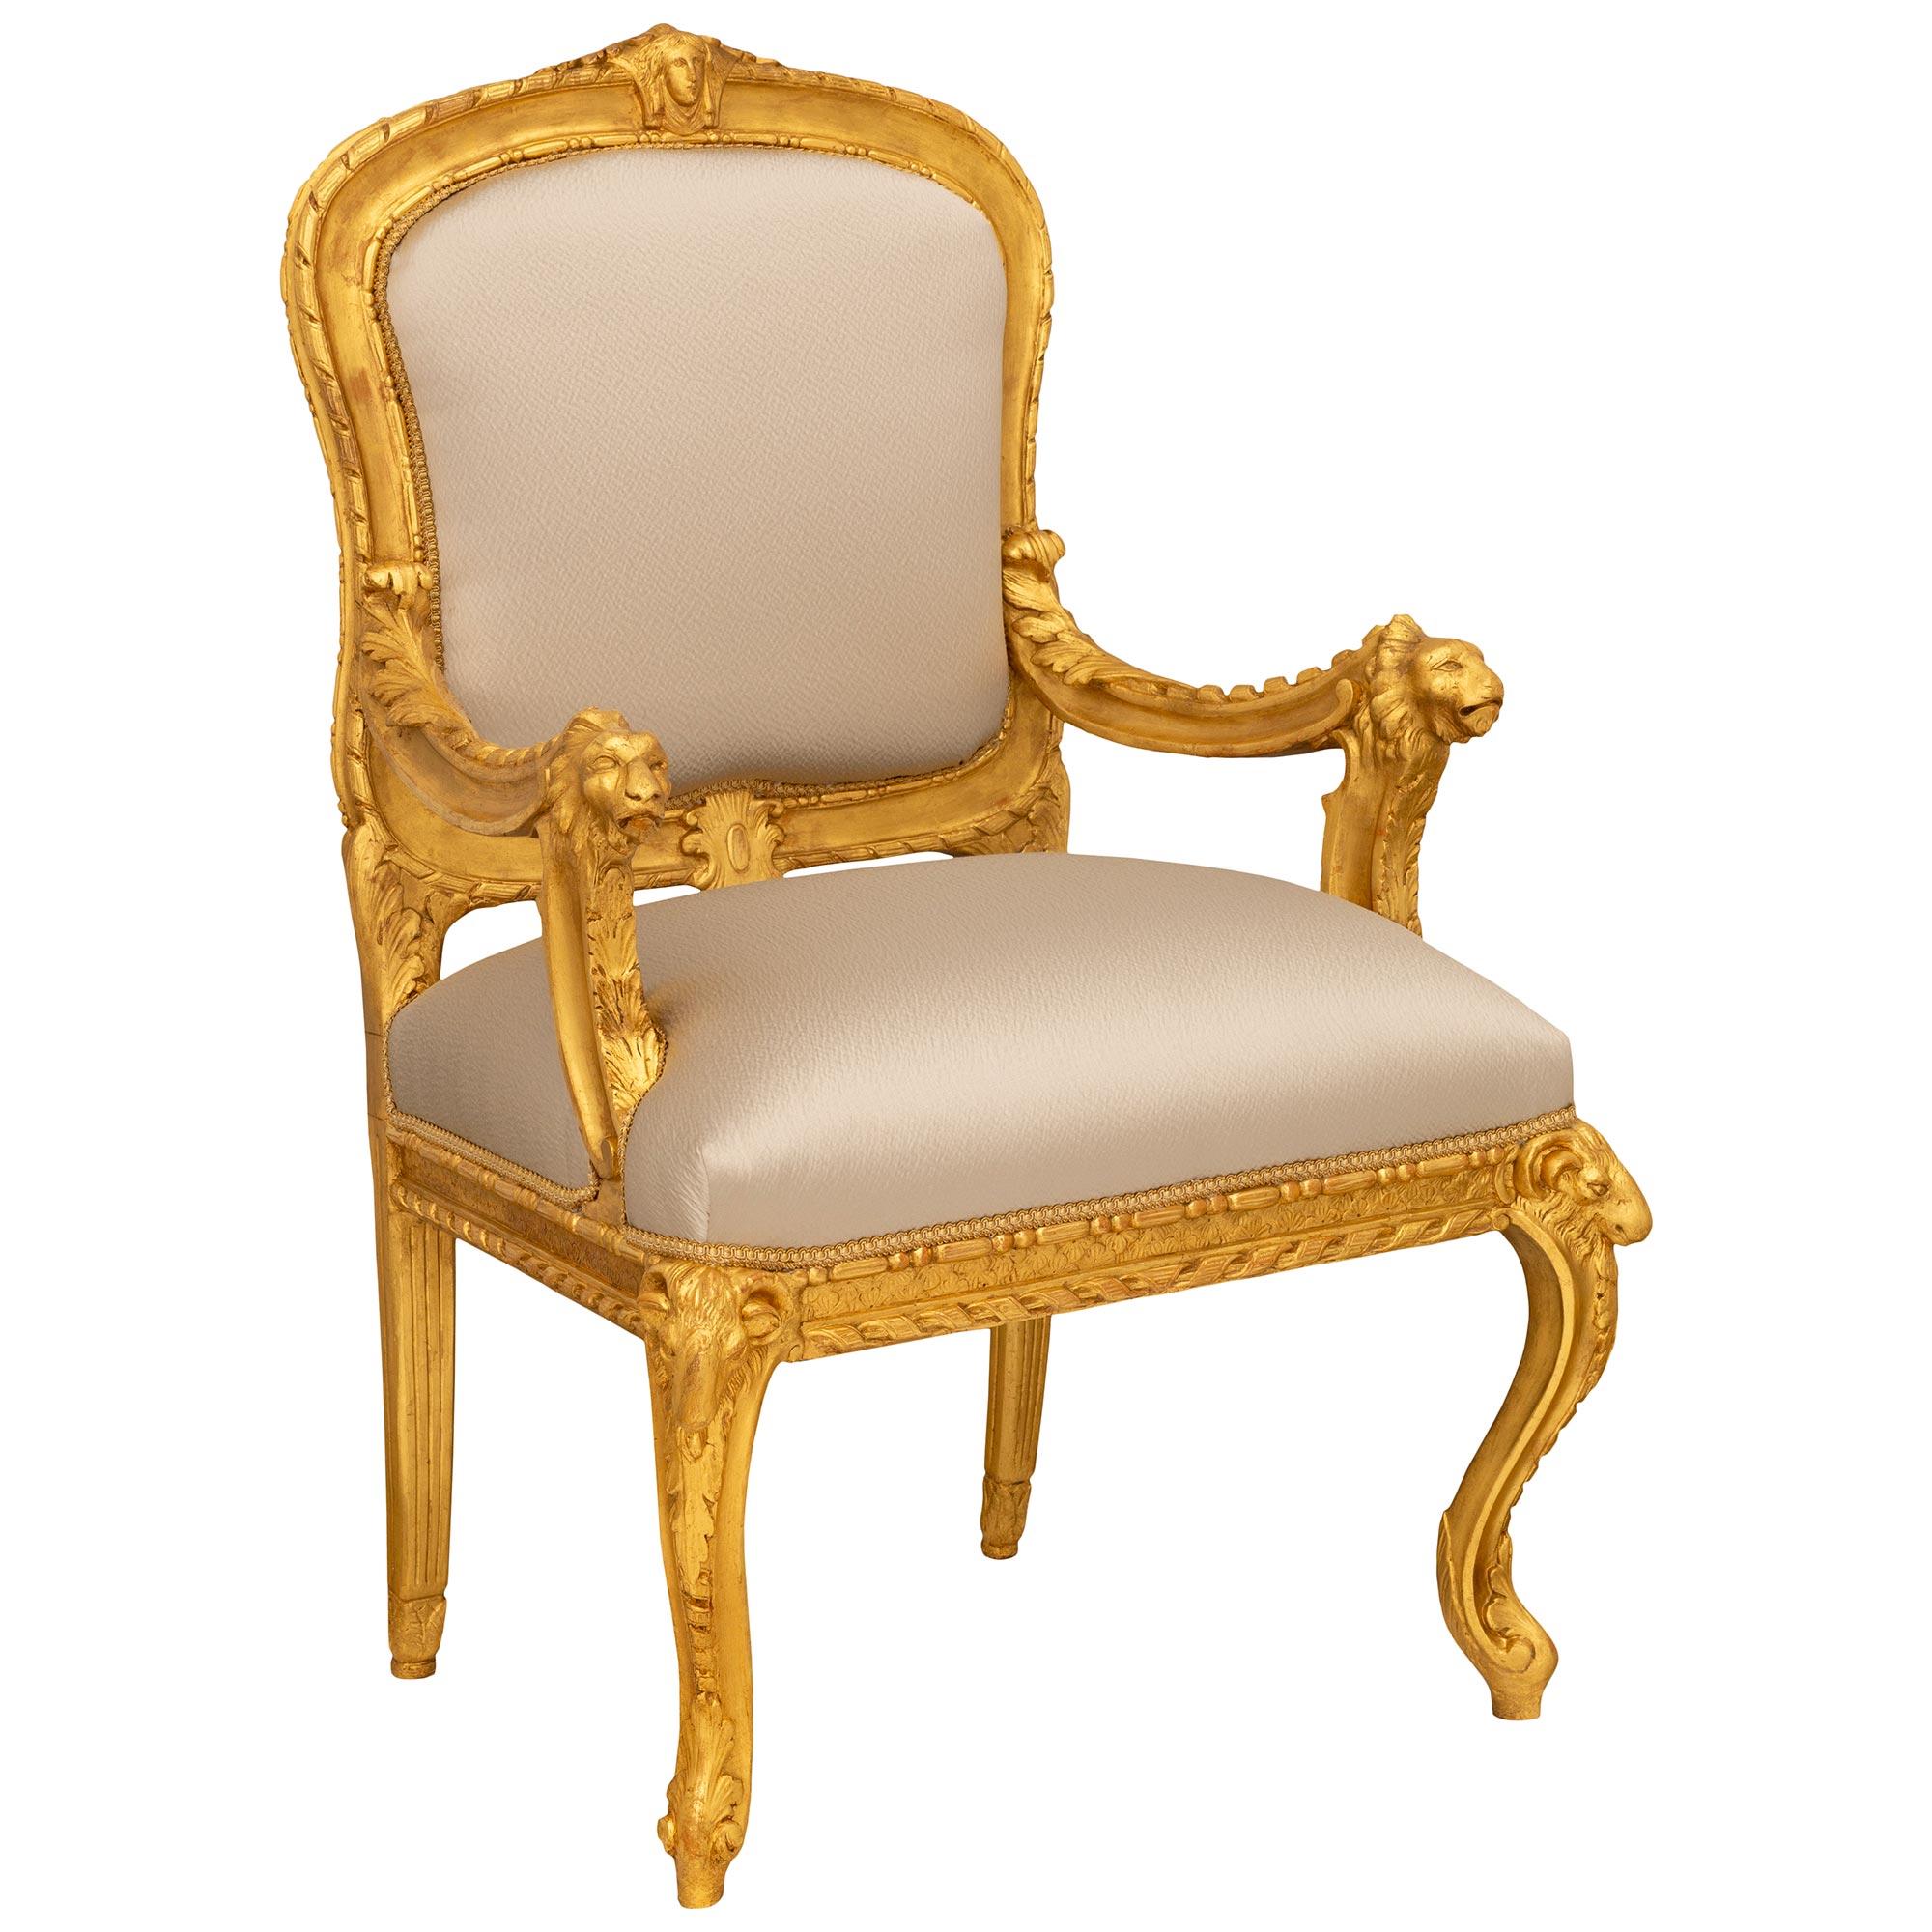 An extremely decorative pair of Italian early 18th century Baroque period Giltwood armchairs. Each wonderfully detailed armchair is raised on front cabriole legs displaying stunning acanthus leaf and twisted ribbon carvings leading to bold rams